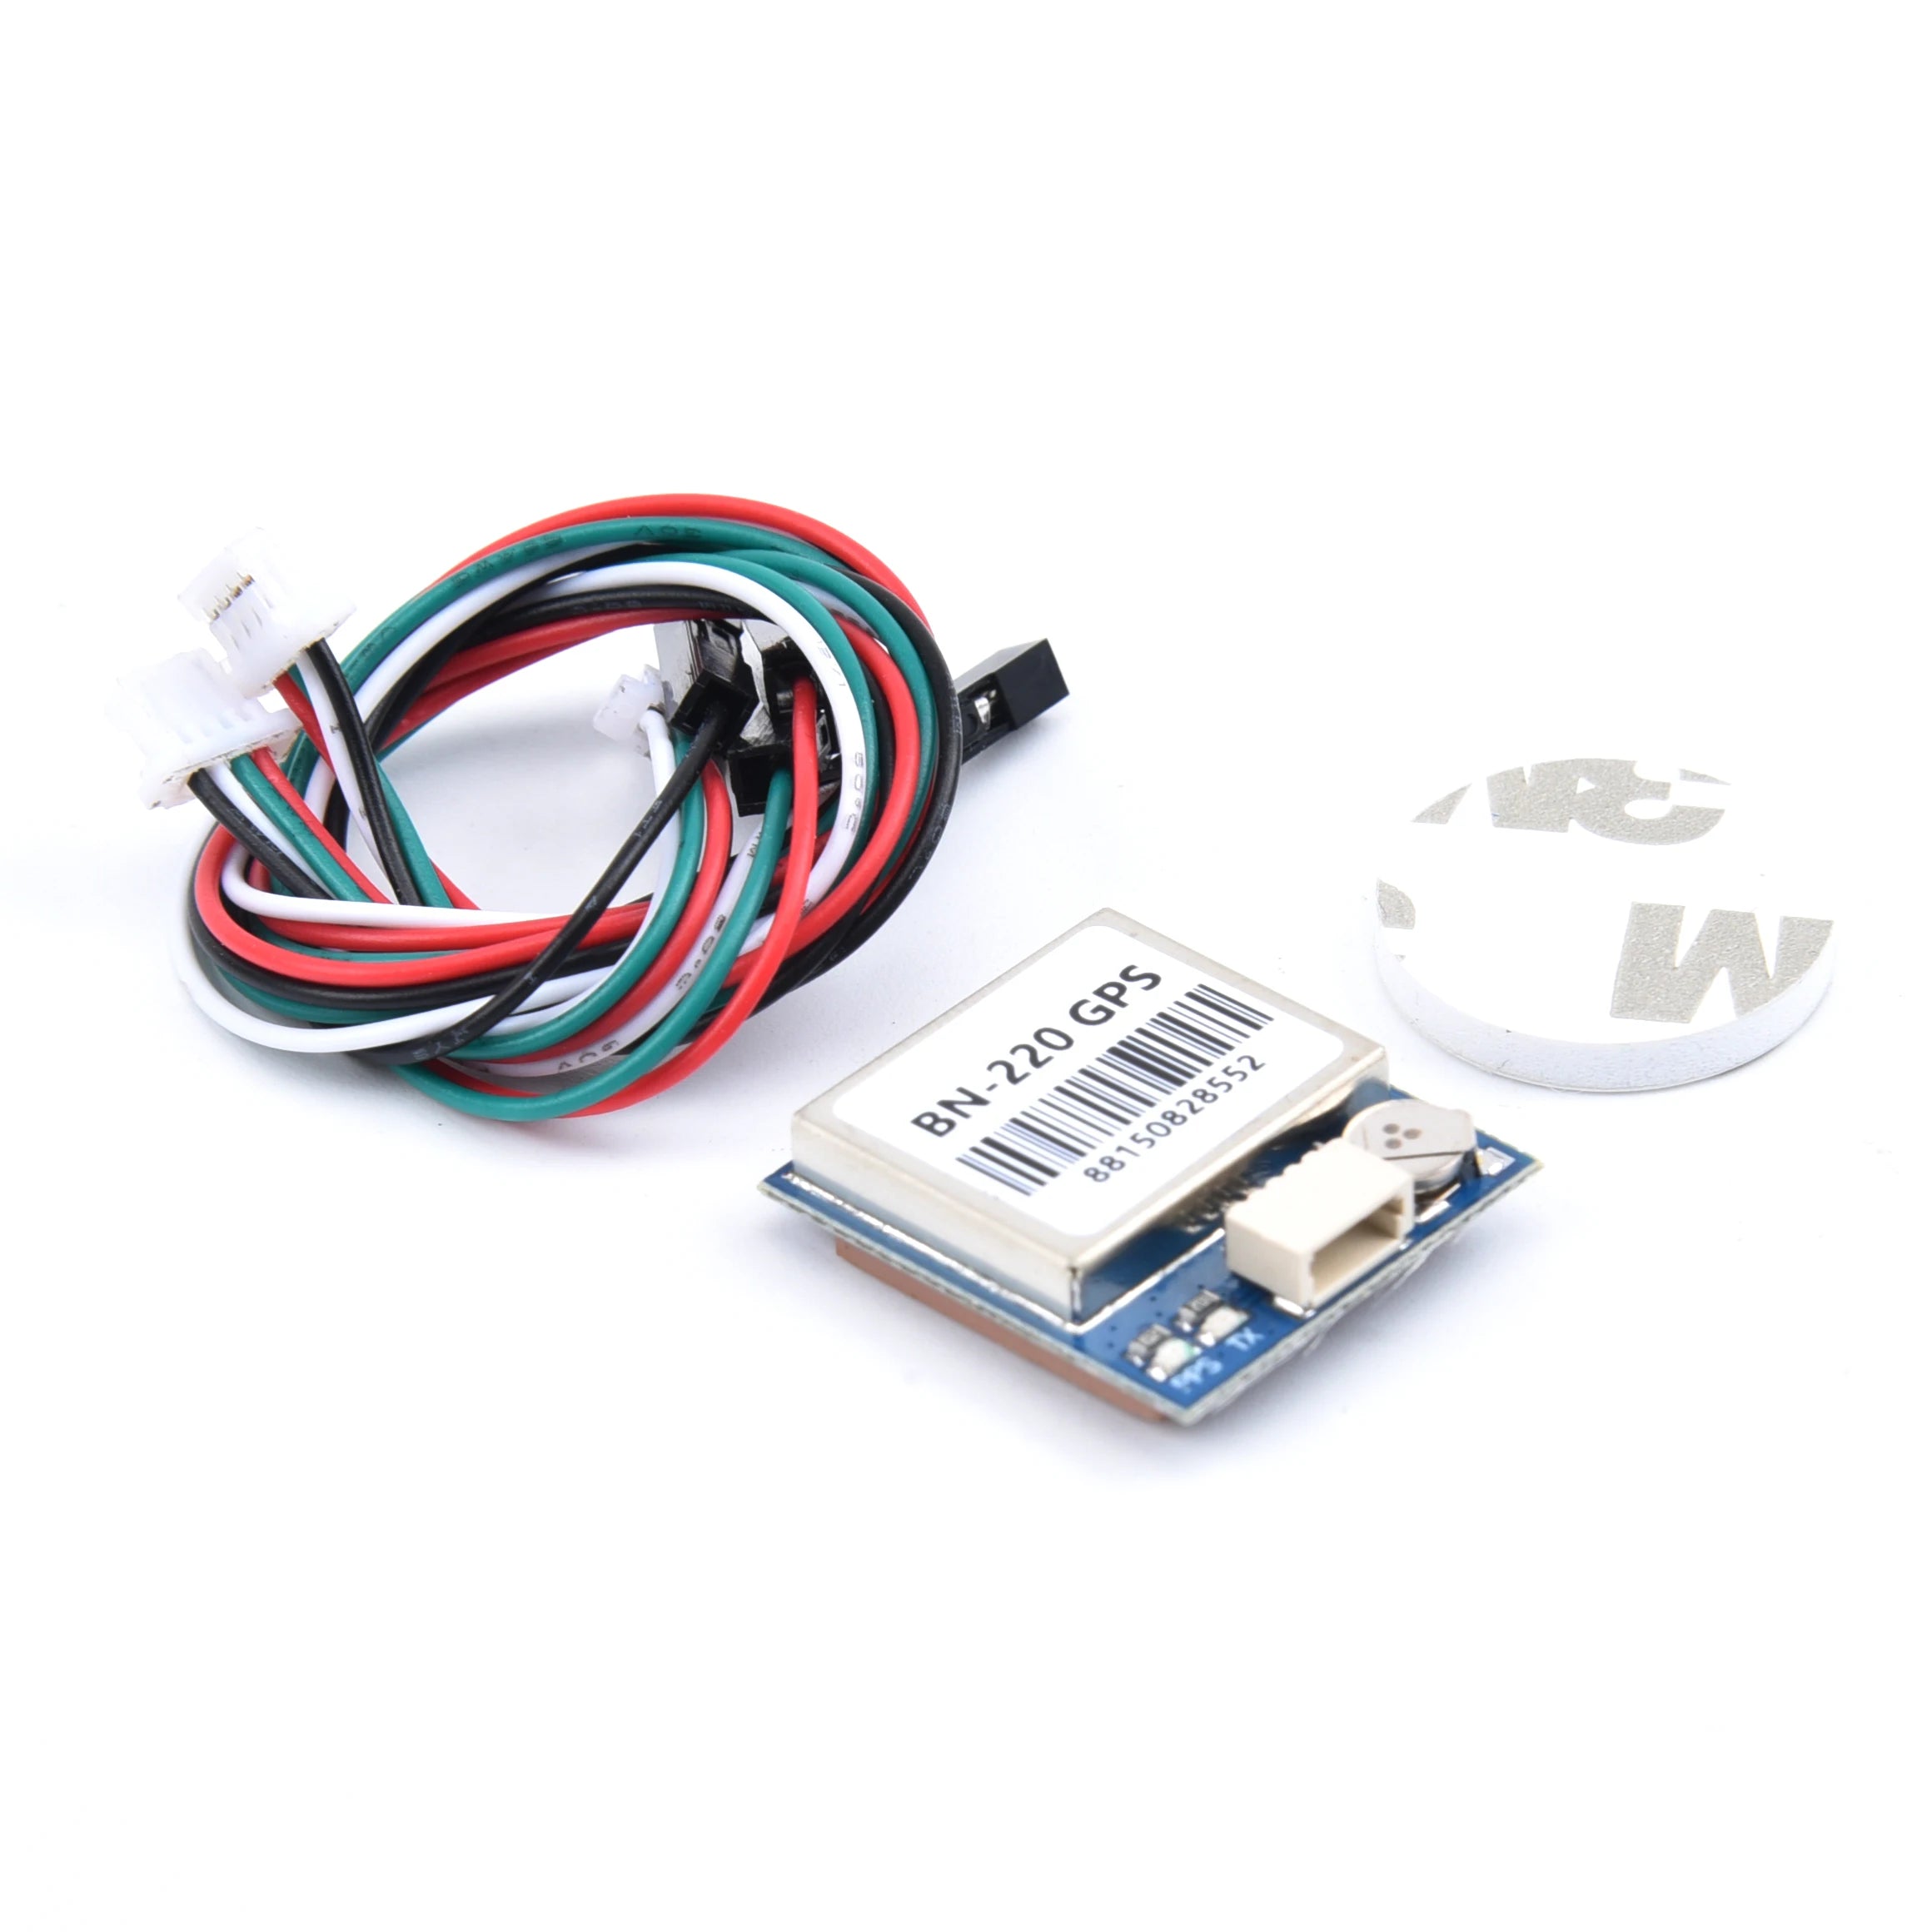 GPS Dual Module for MINI F3 F4, Channels 72 Searching Channel Sensitivity Tracking -167dBm Re